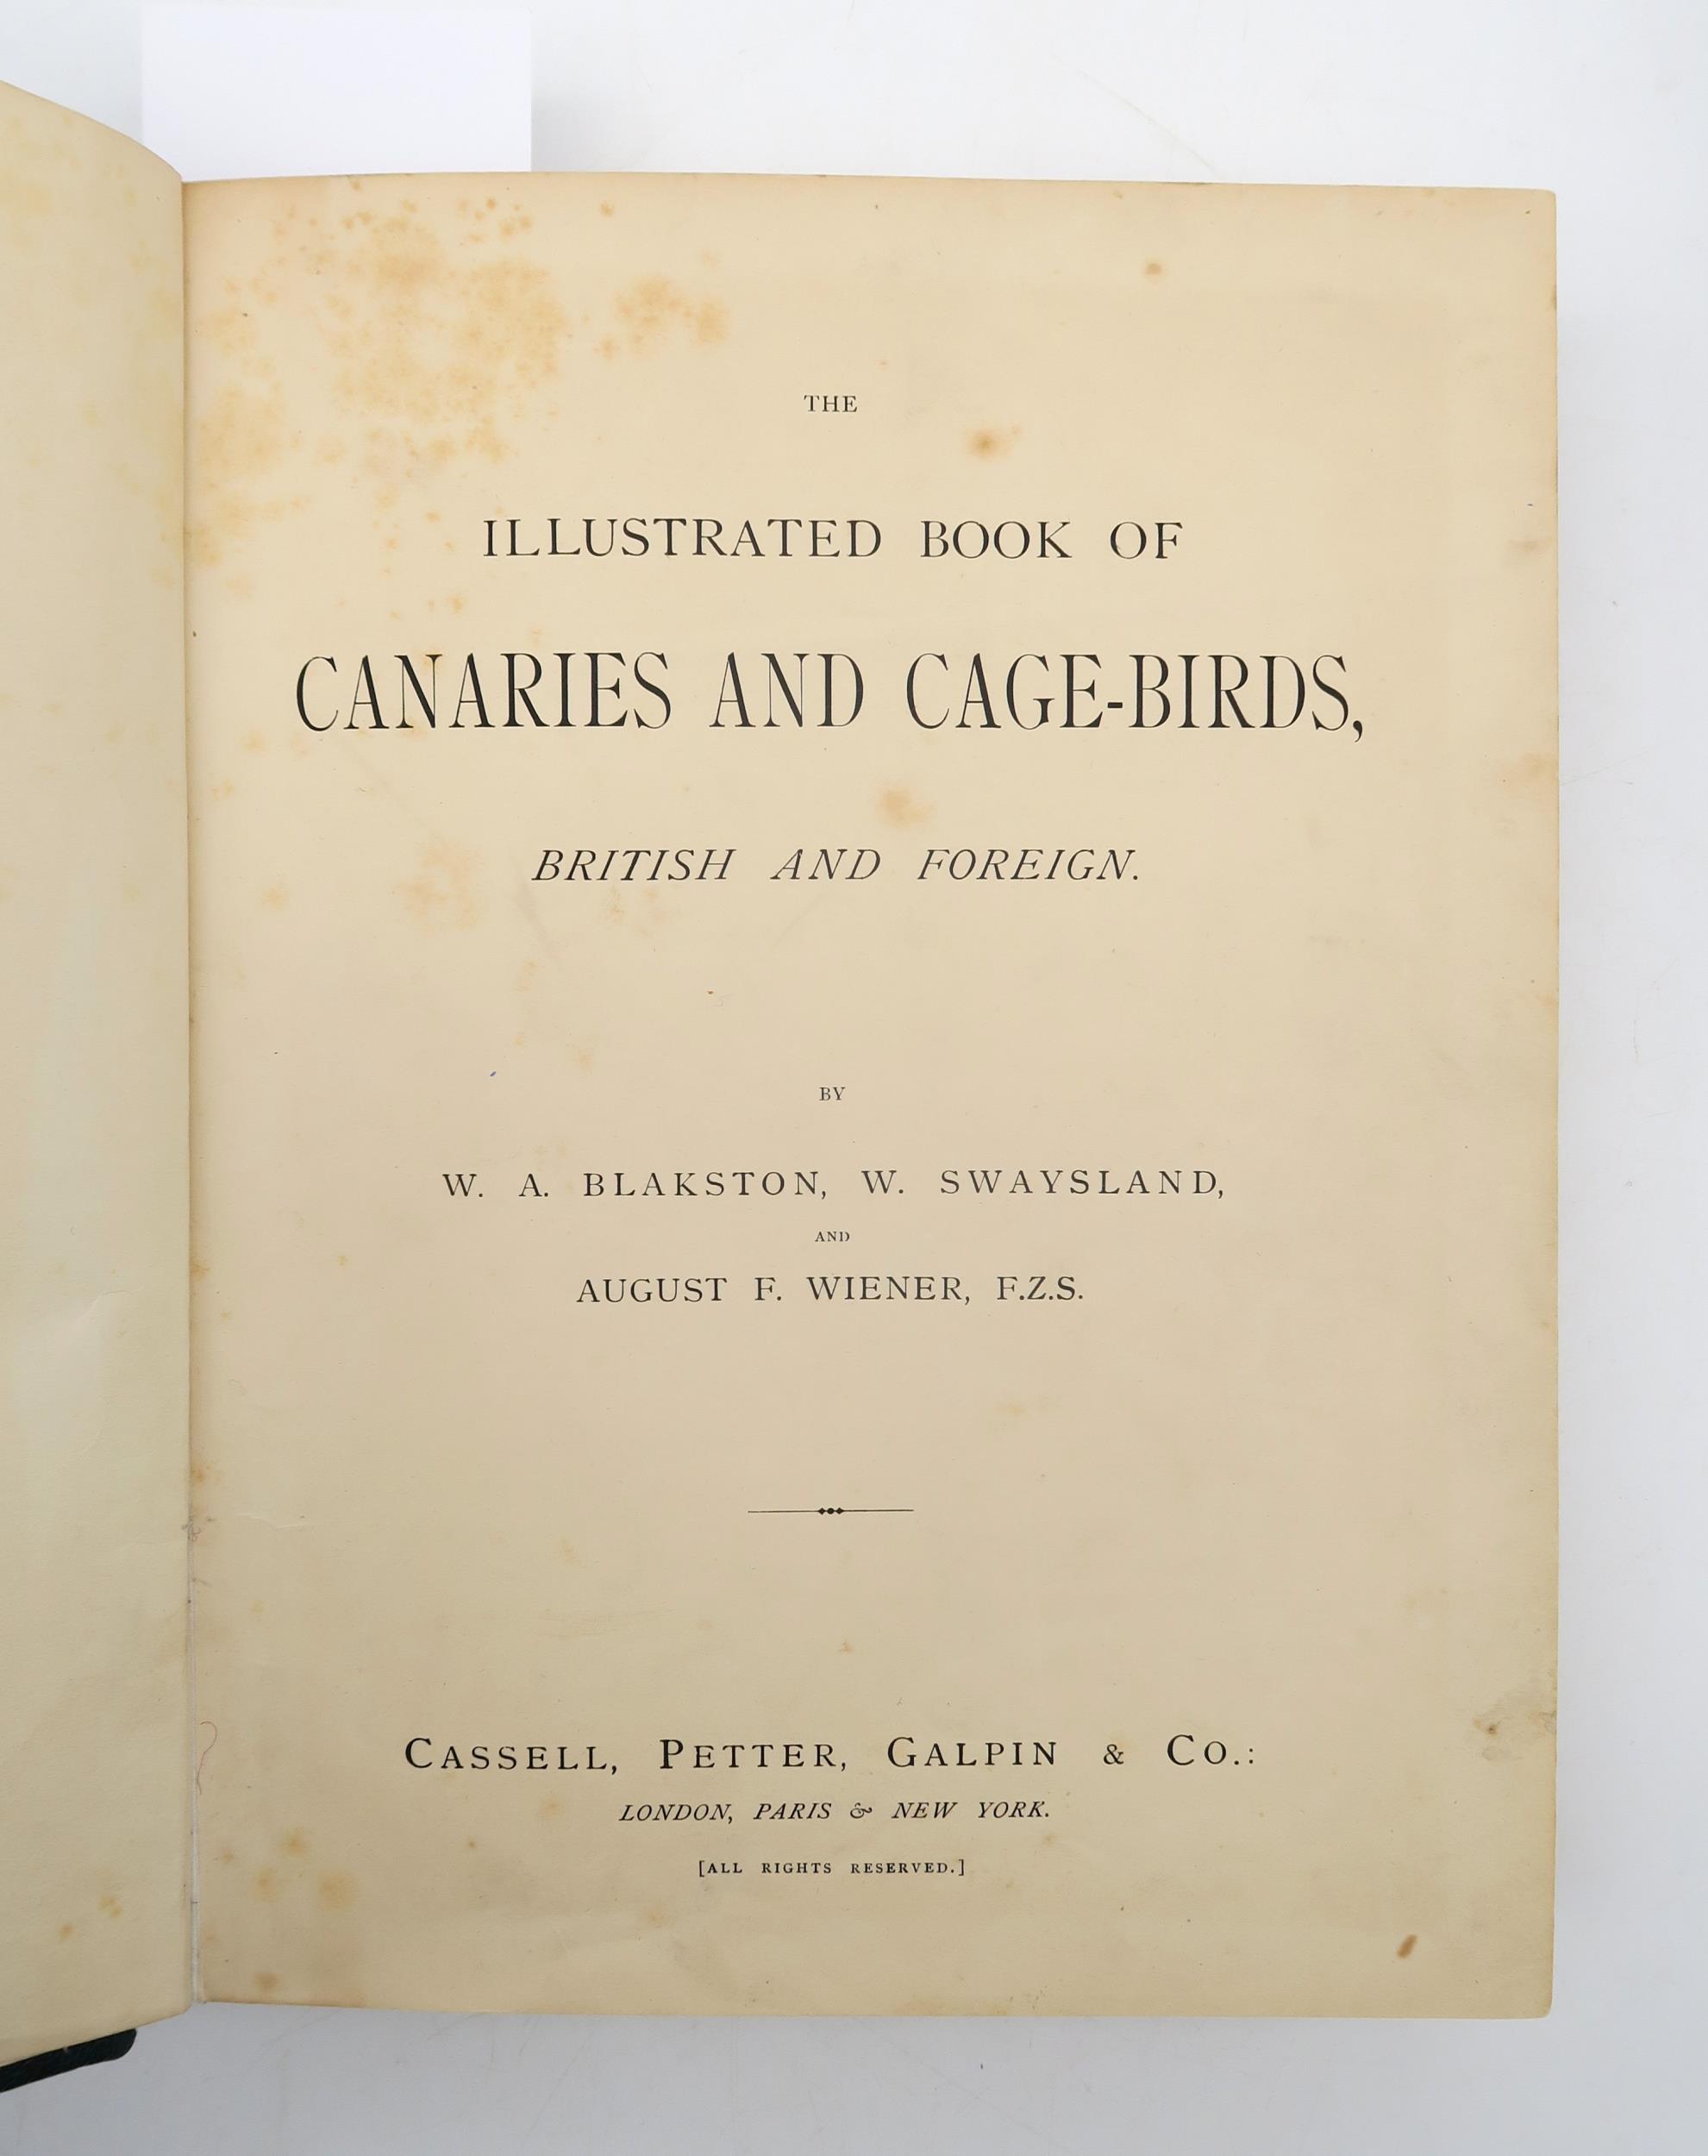 Blakston, W.A. et al. The Illustrated Book of Canaries and Cage-Birds Cassell, Petter, Galpin & Co., - Image 2 of 4